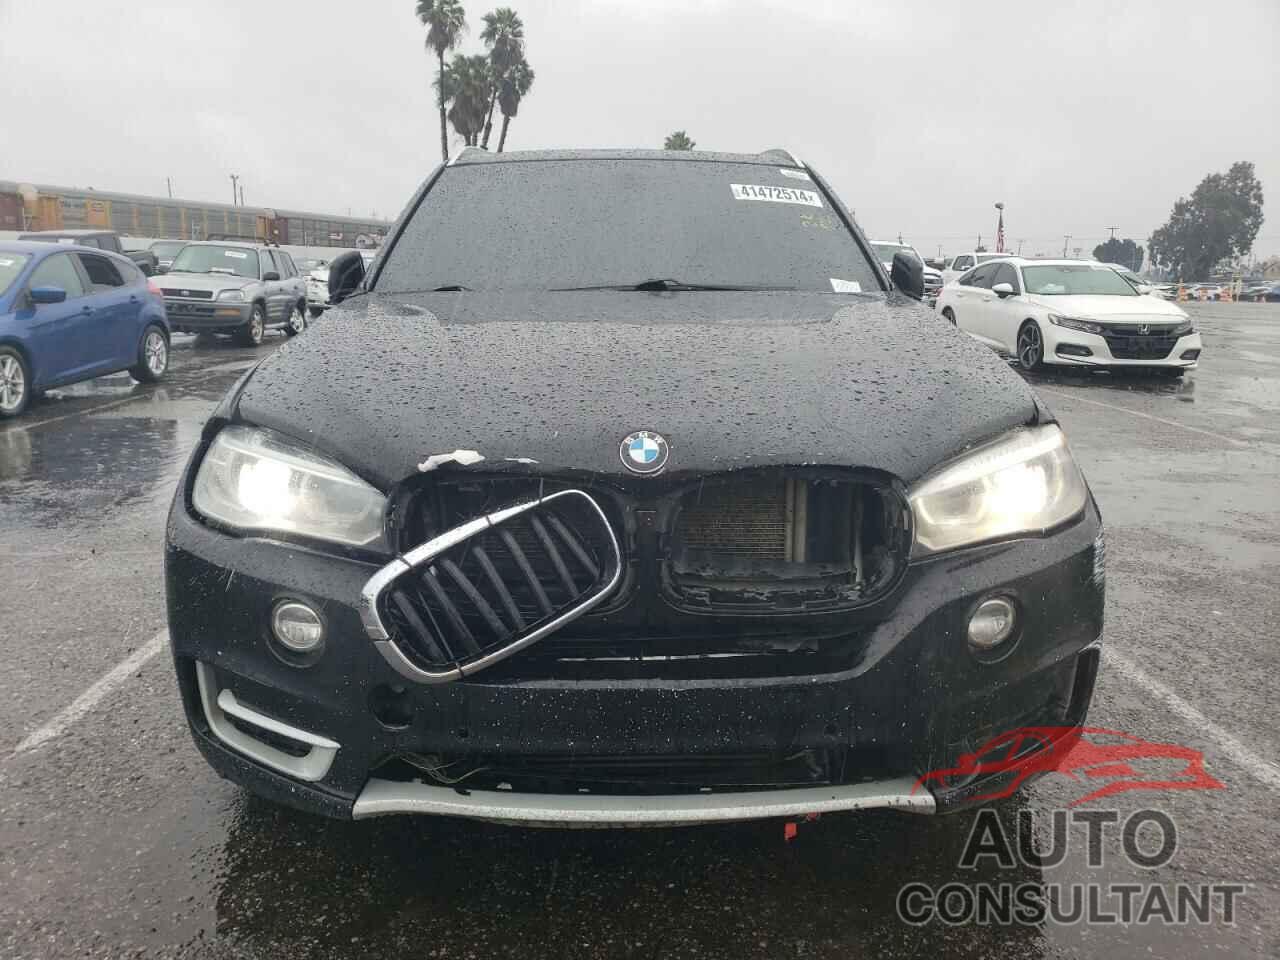 BMW X5 2016 - 5UXKR2C54G0H42950